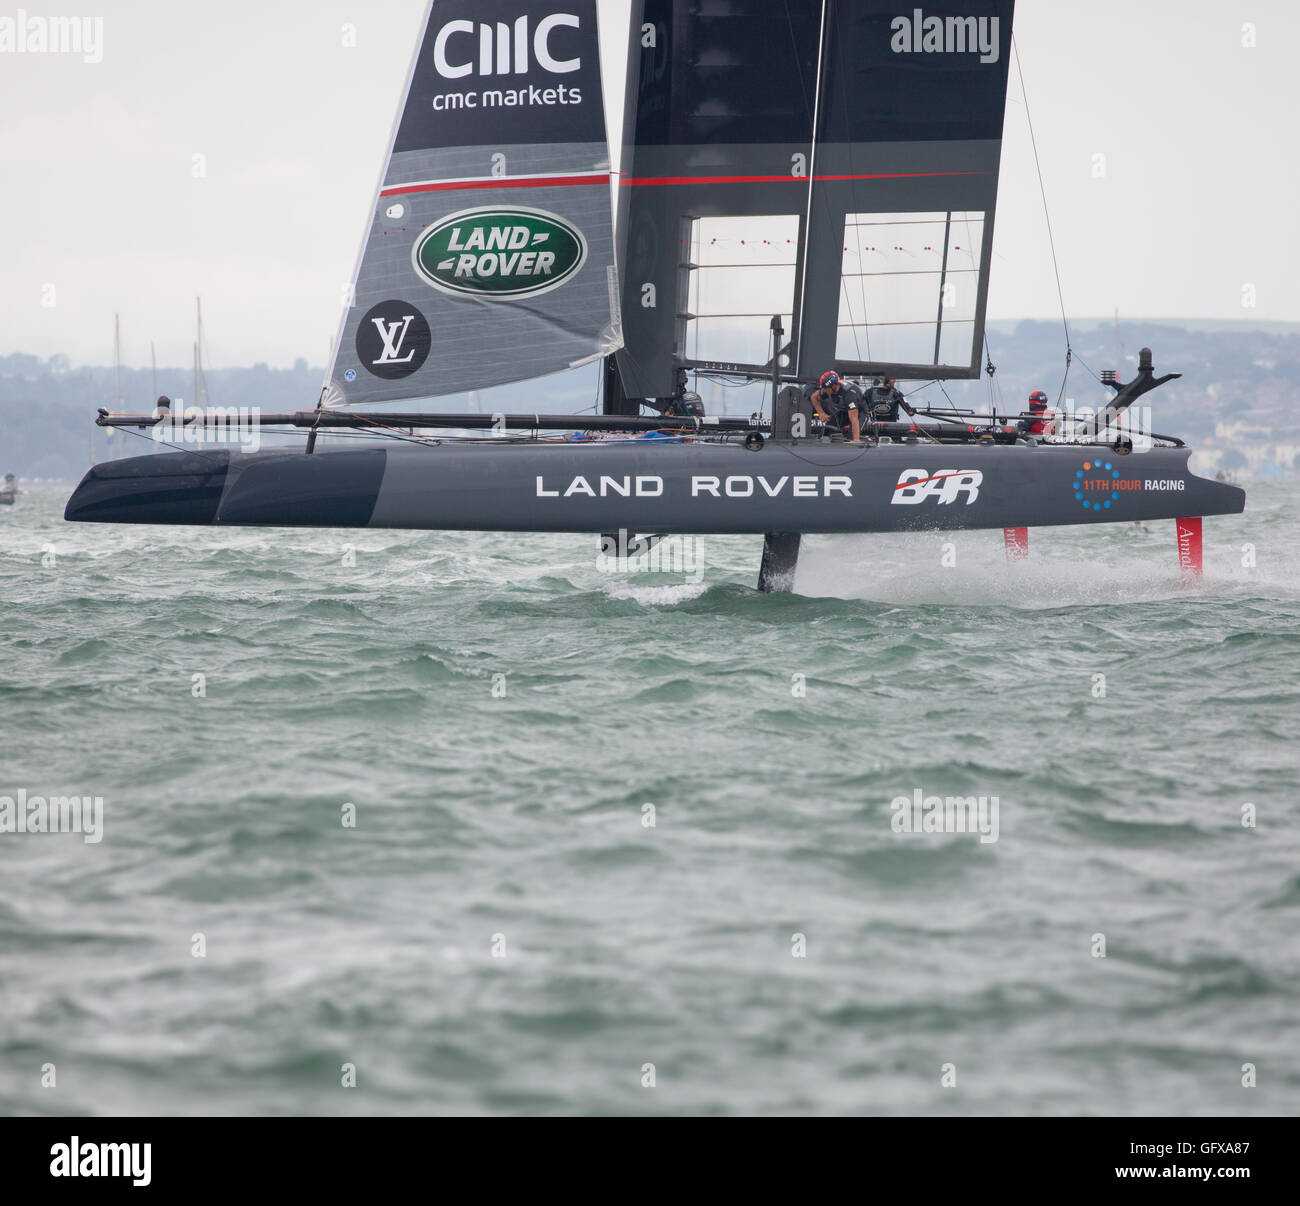 Land Rover BAR sailing team in action at the 2016 America's Cup World Series sailing event in Portsmouth, UK Stock Photo